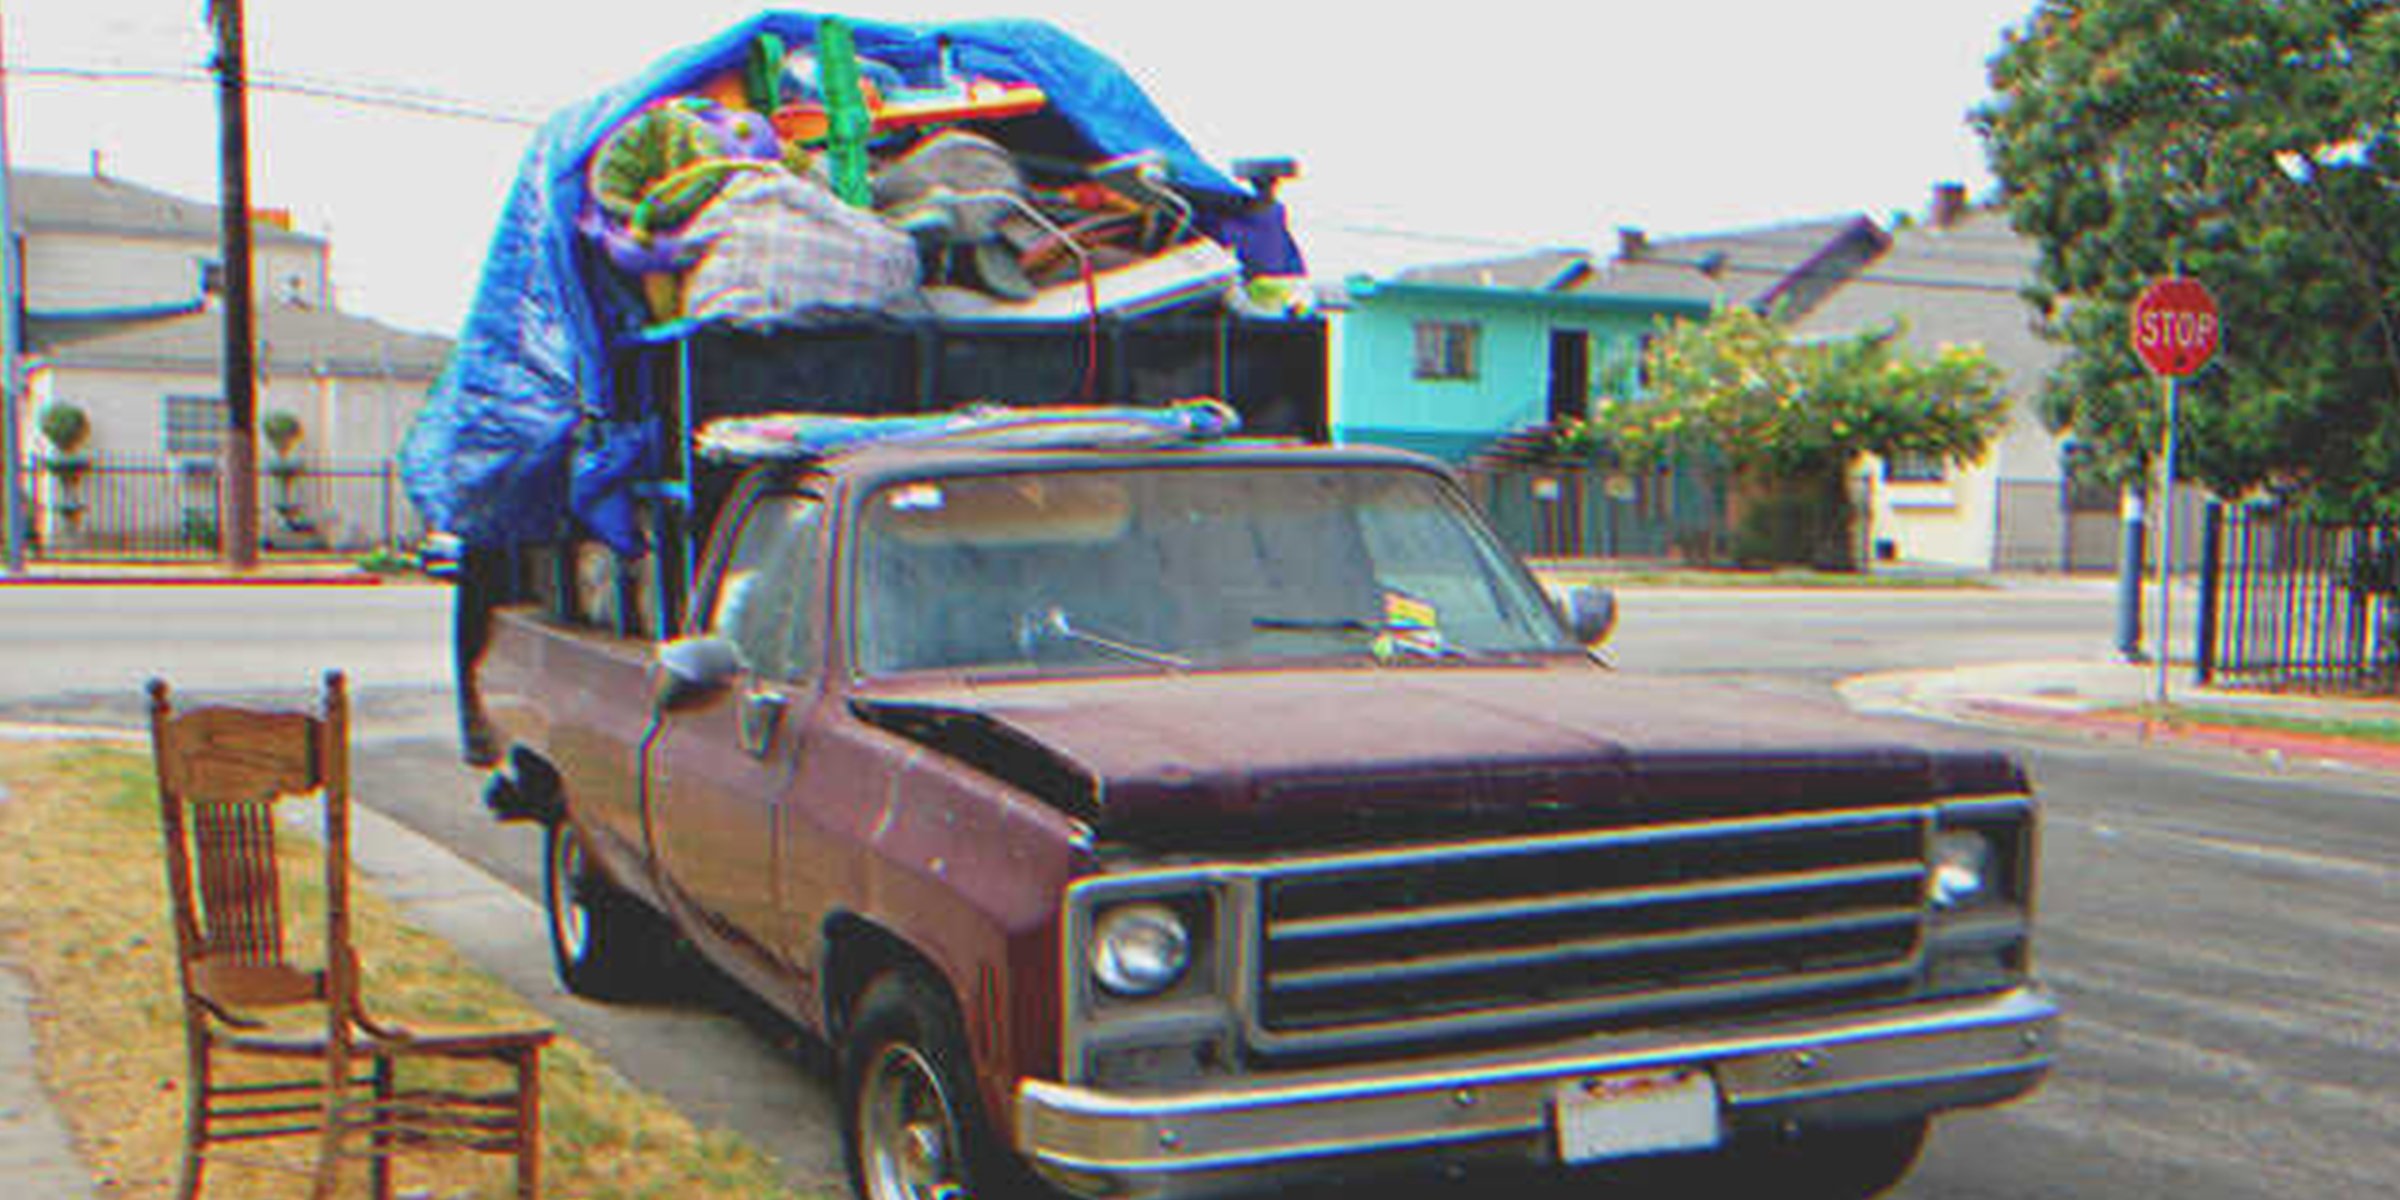 A pickup truck full of things | Source: Shutterstock